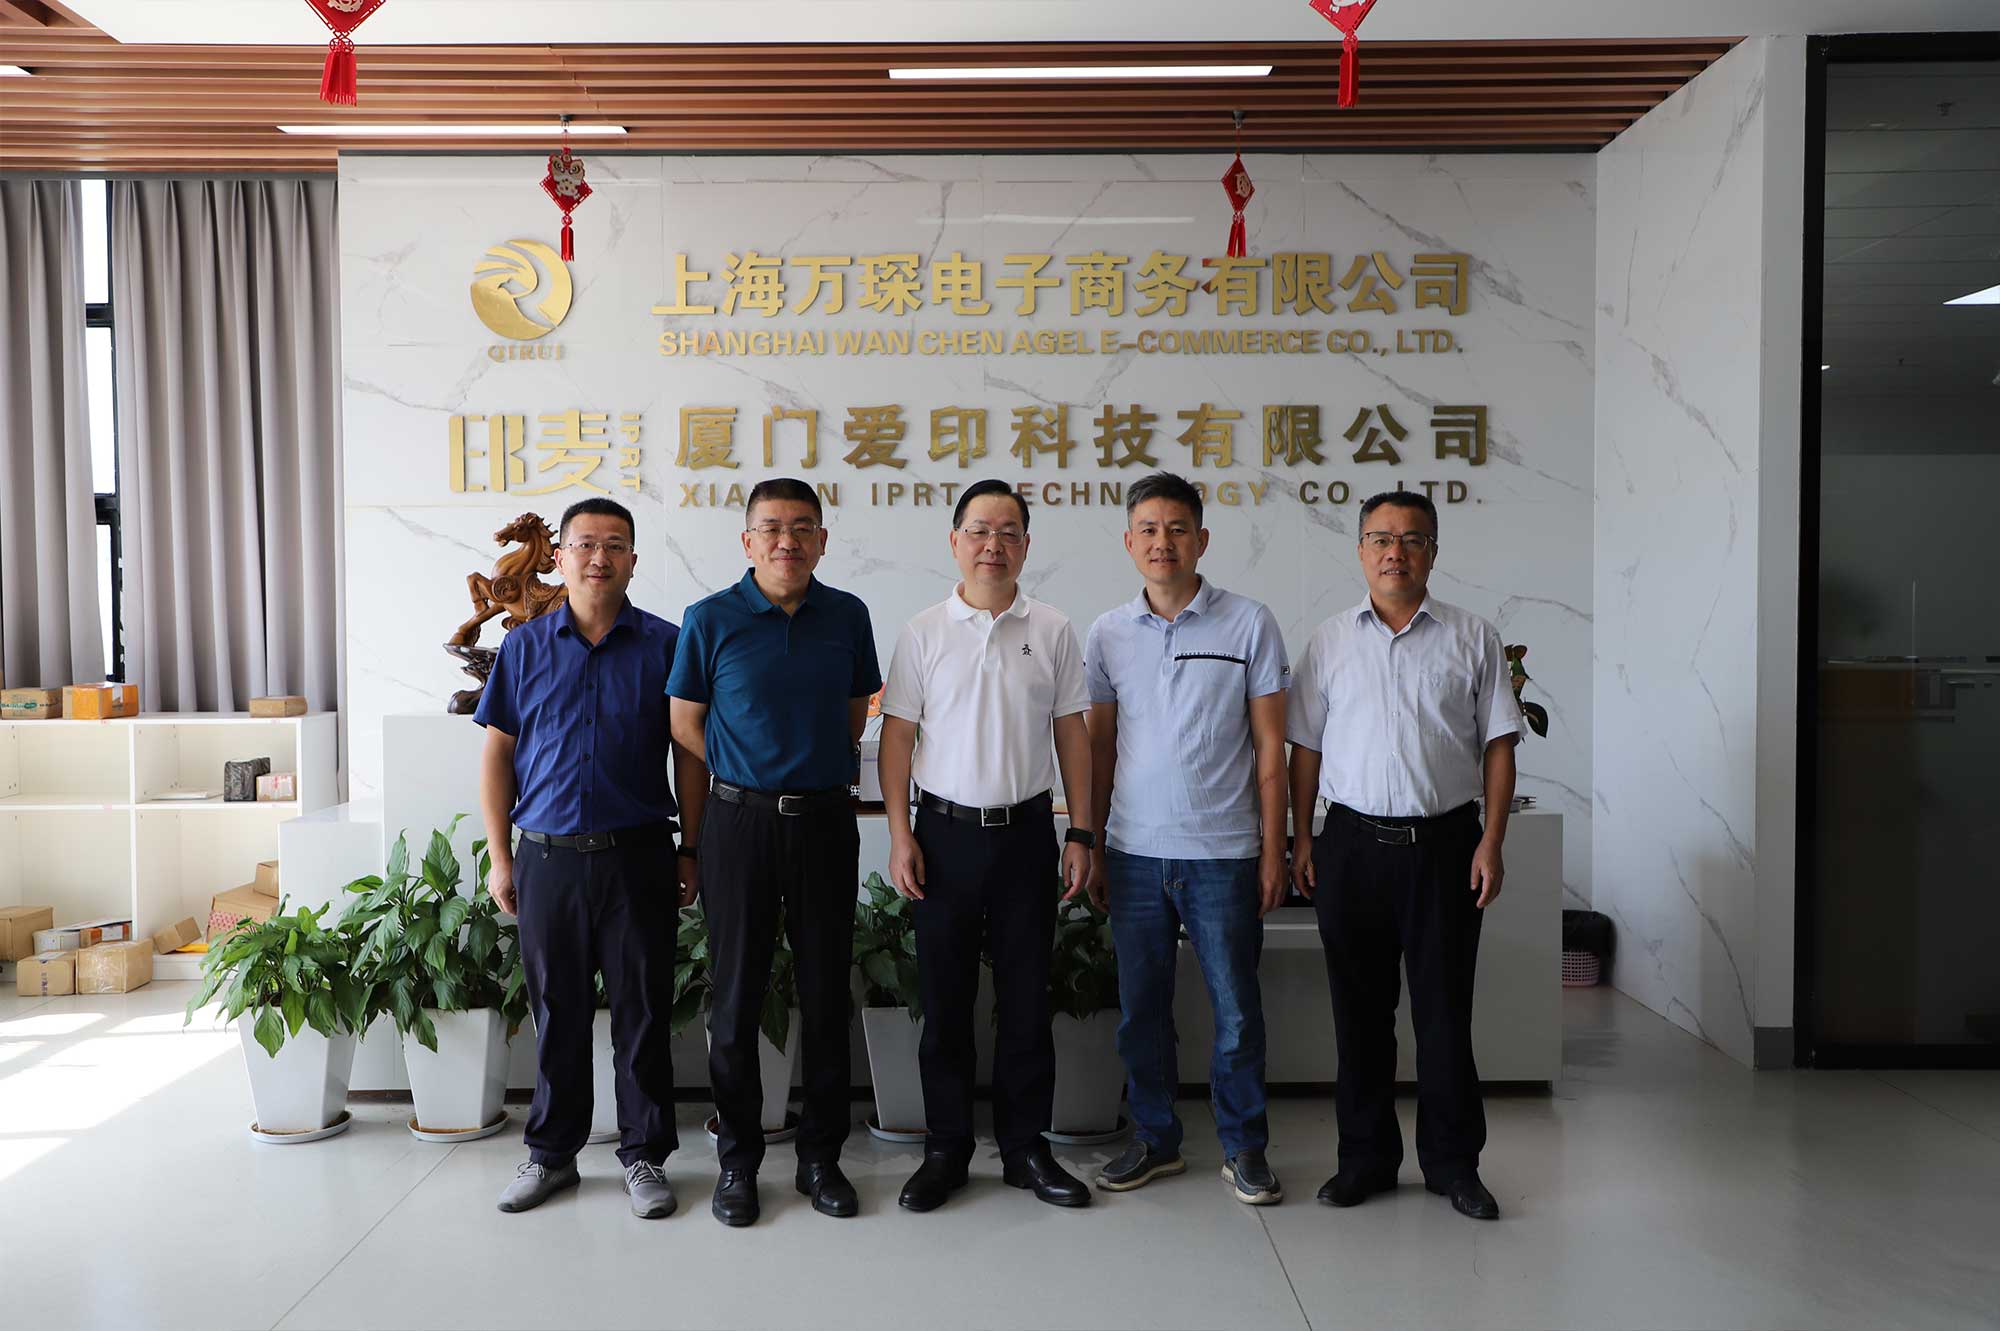 Vice President of Xiamen CPPCC Li Qinhui and others visited IPRT Technology for investigation and guidance